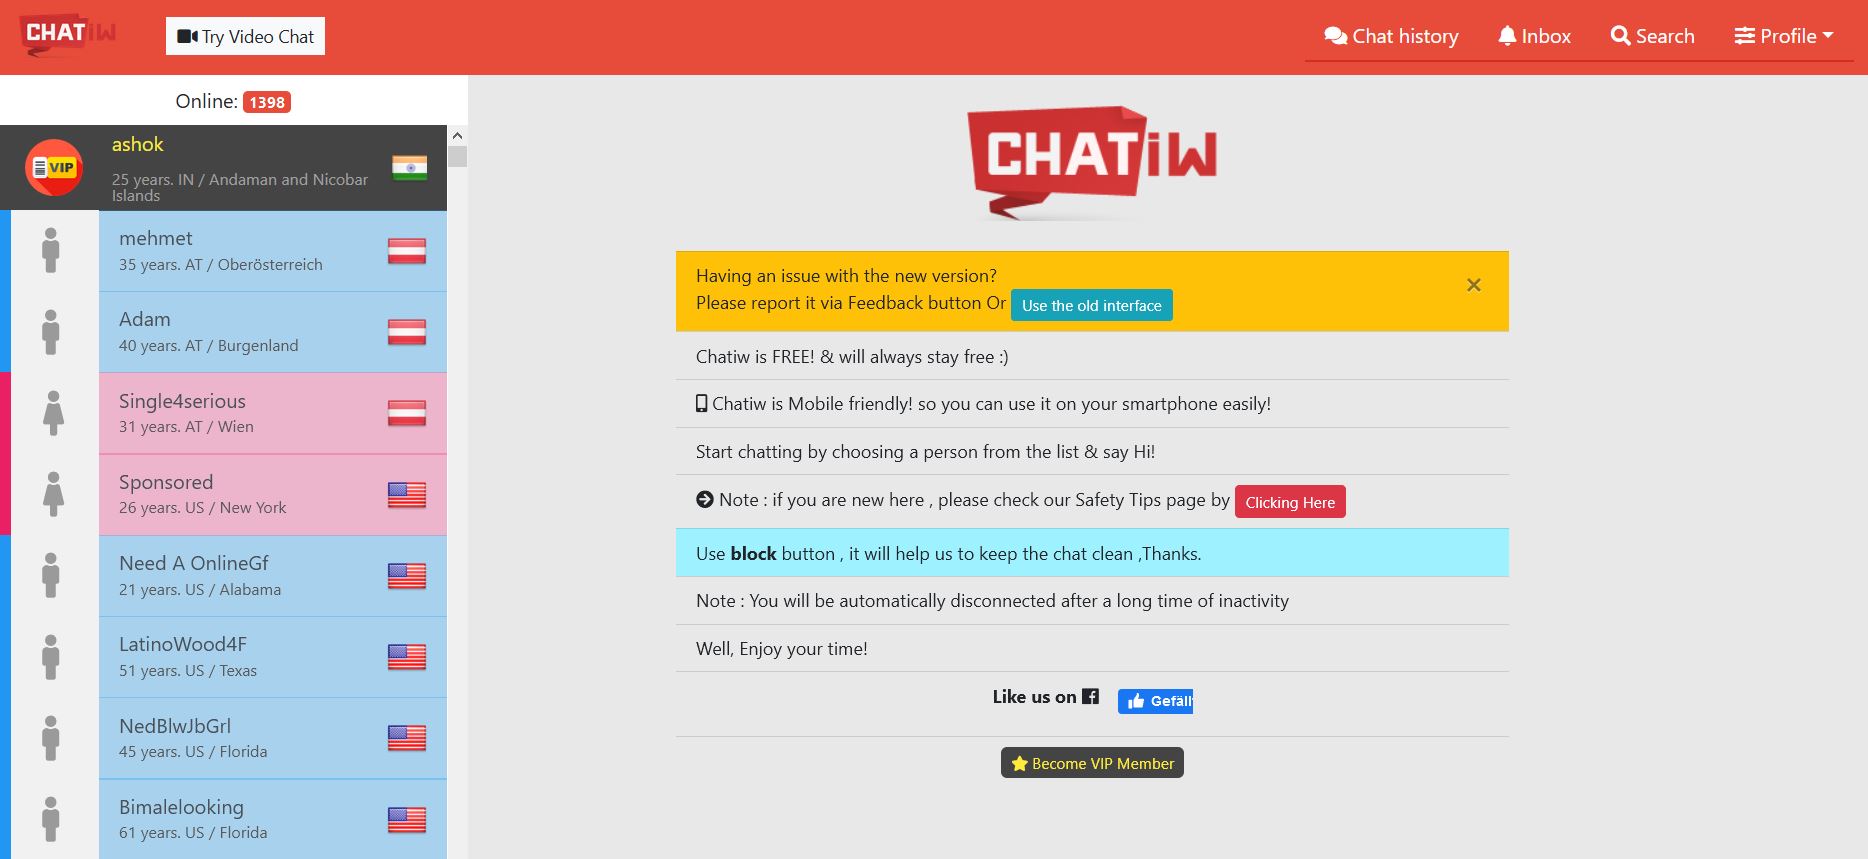 Room chatiw chat Chatiw: Free